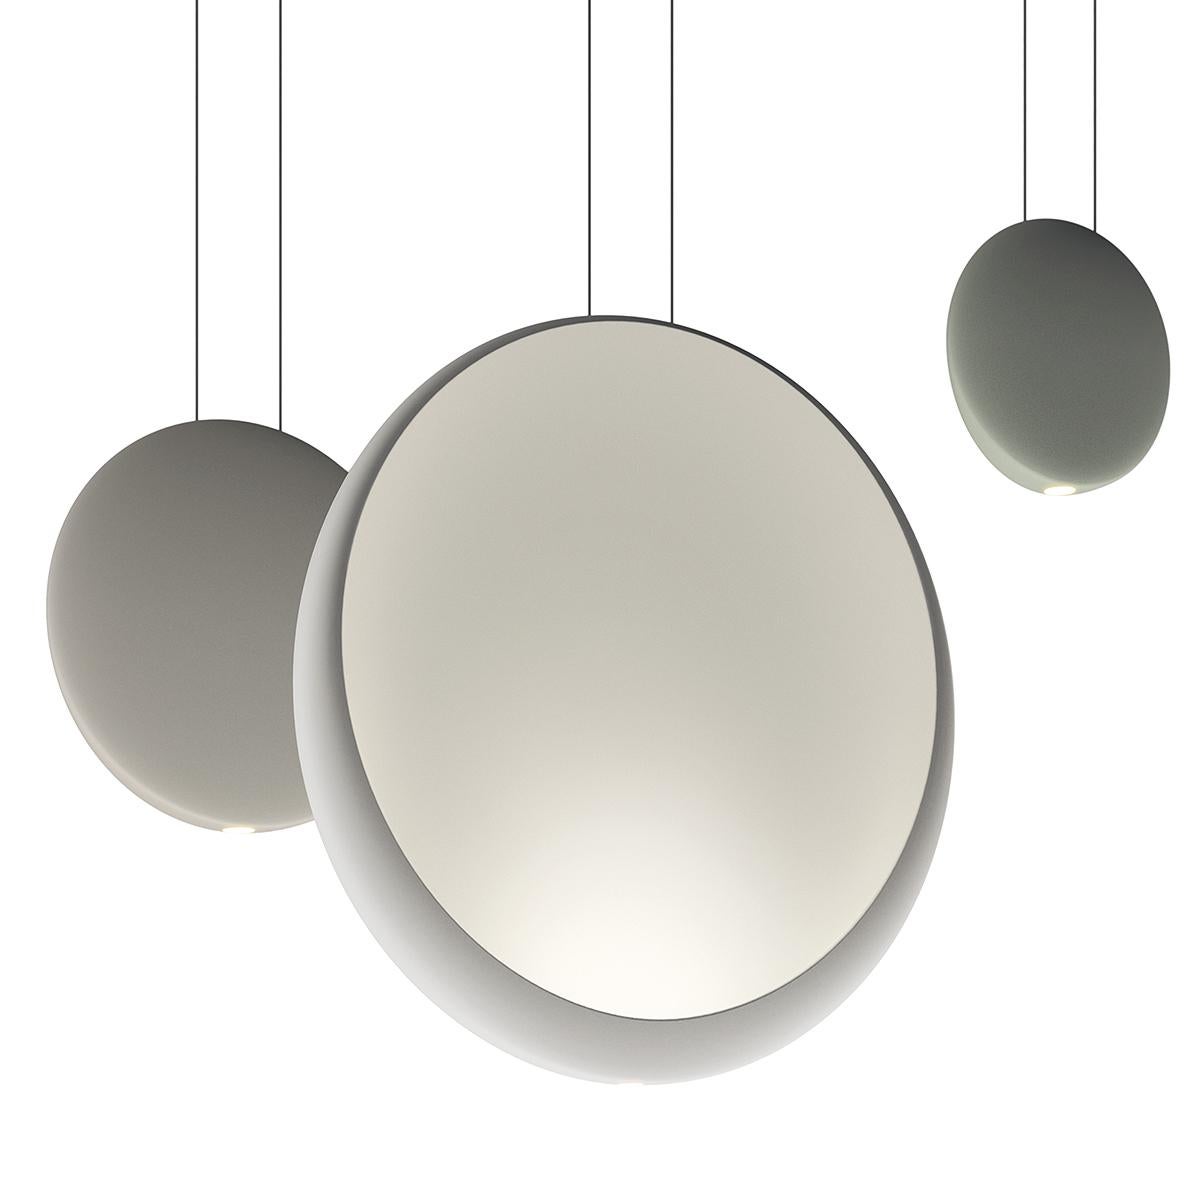 Cosmos is a sculptural hanging lamp. Designed by Lievore, Altherr and Molina. Available in various colors: chocolate, green and light grey.

Installation type: Surface

Shade: Polycarbonate diffuser

Materials: 
Canopy Plate: Steel
Body: